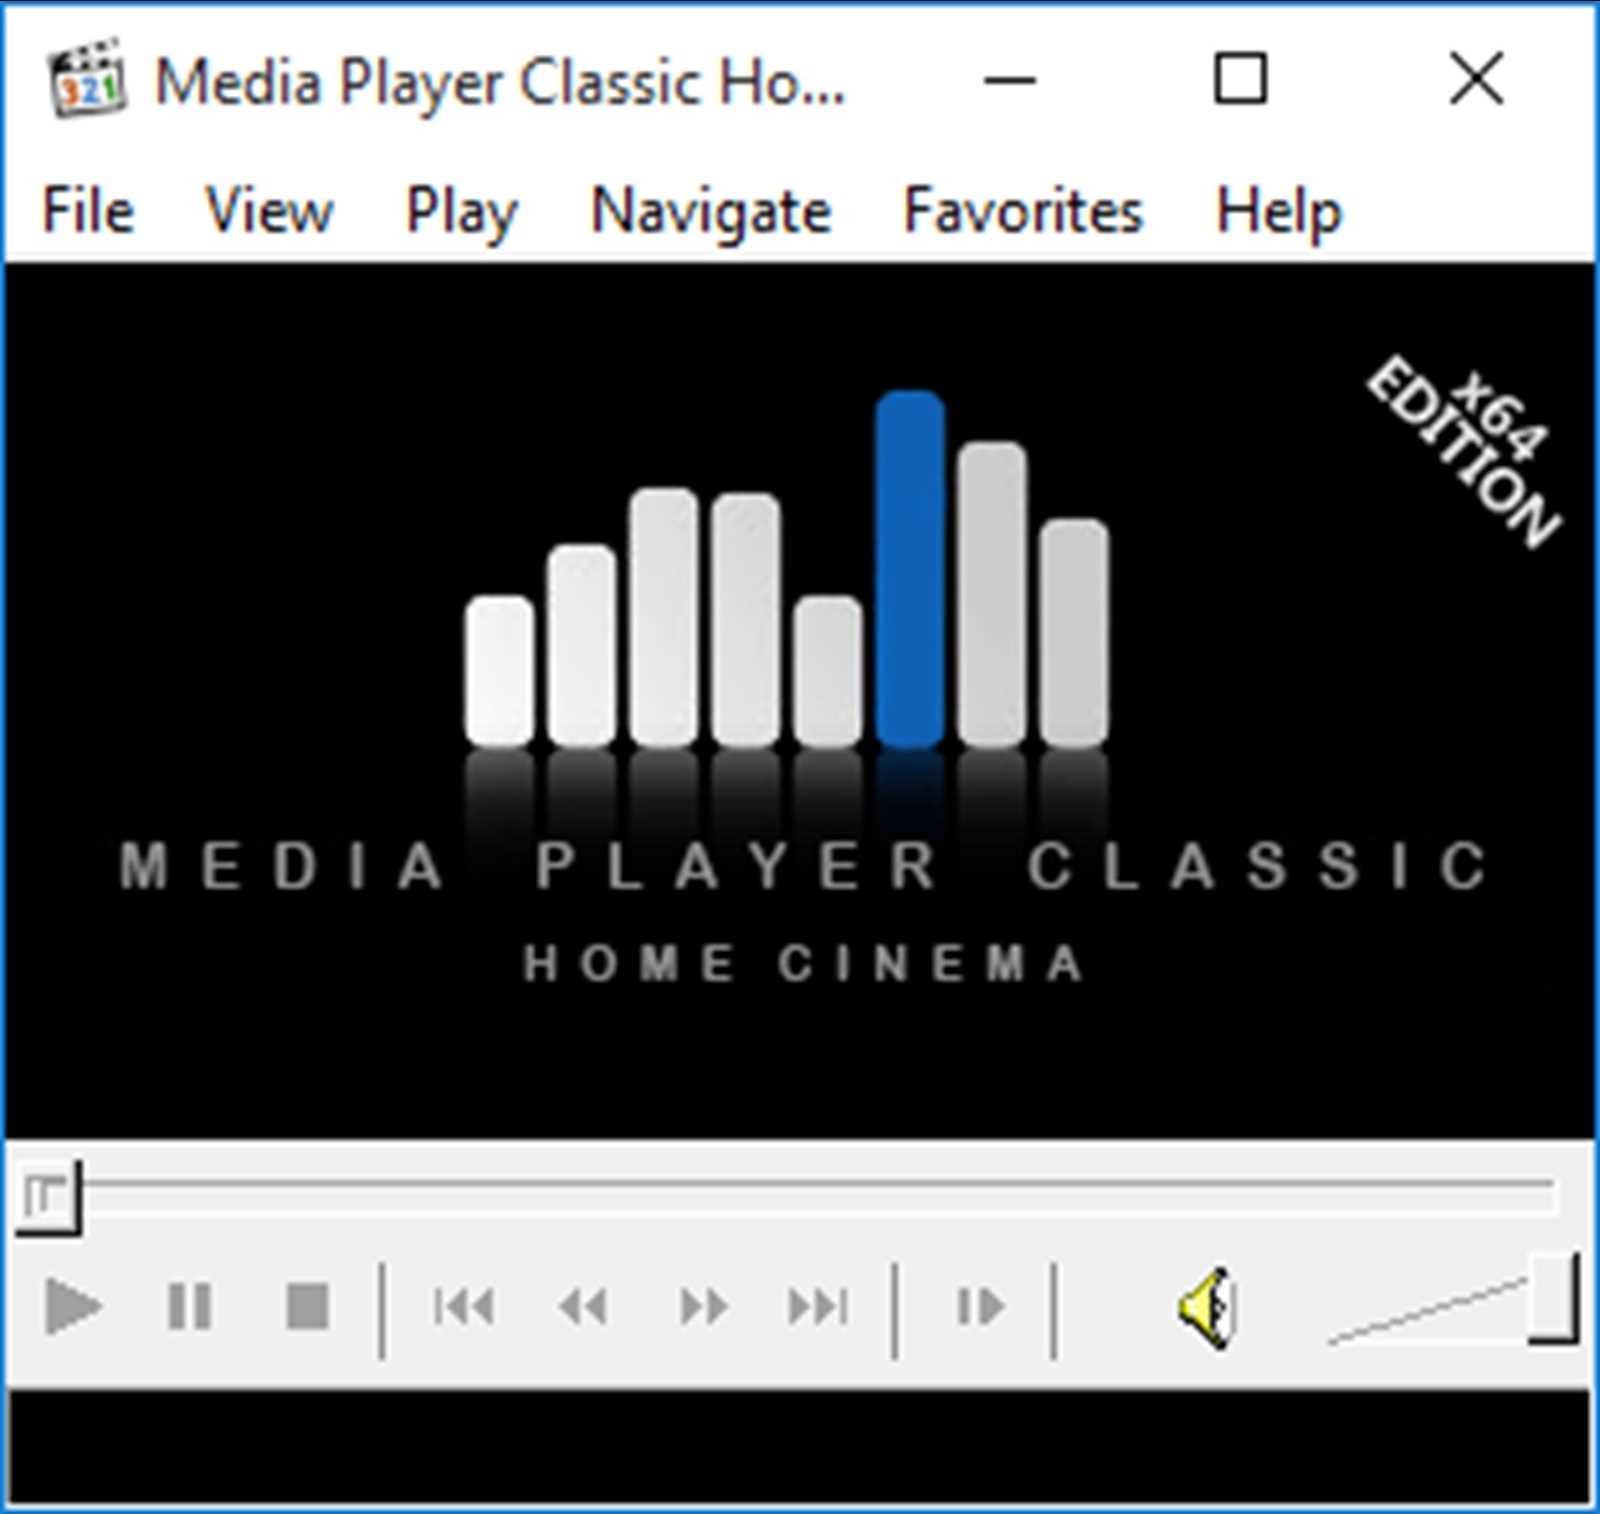 mpc hc player download for windows 10 64 bit